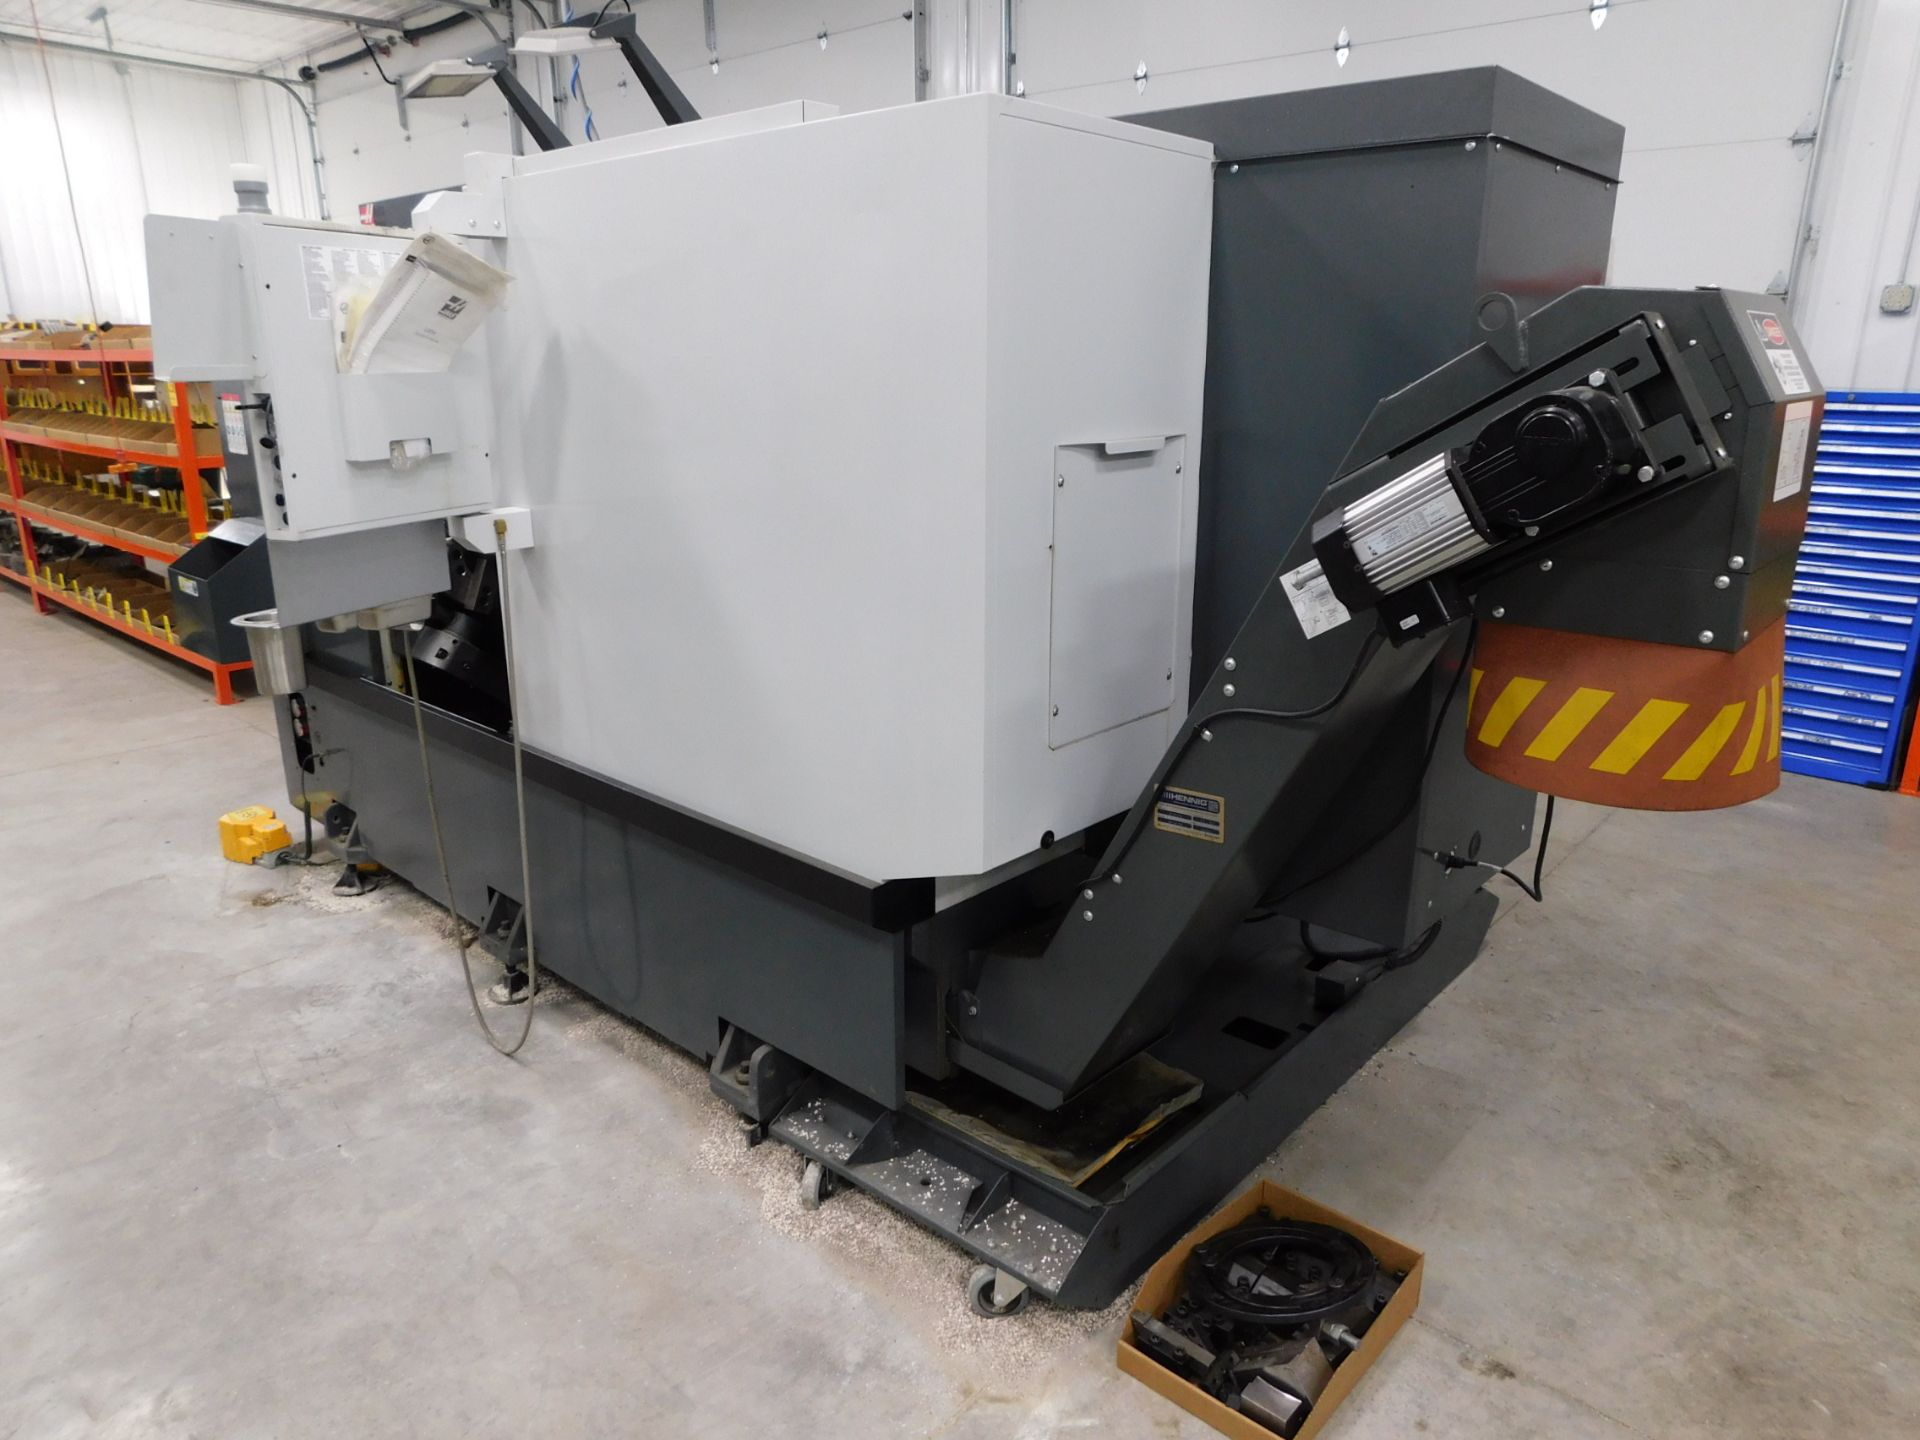 Haas ST30 CNC Turning Center sn 3119670, New in 2020, 12"3-Jaw Chuck, 12-Station Turret, - Image 10 of 16